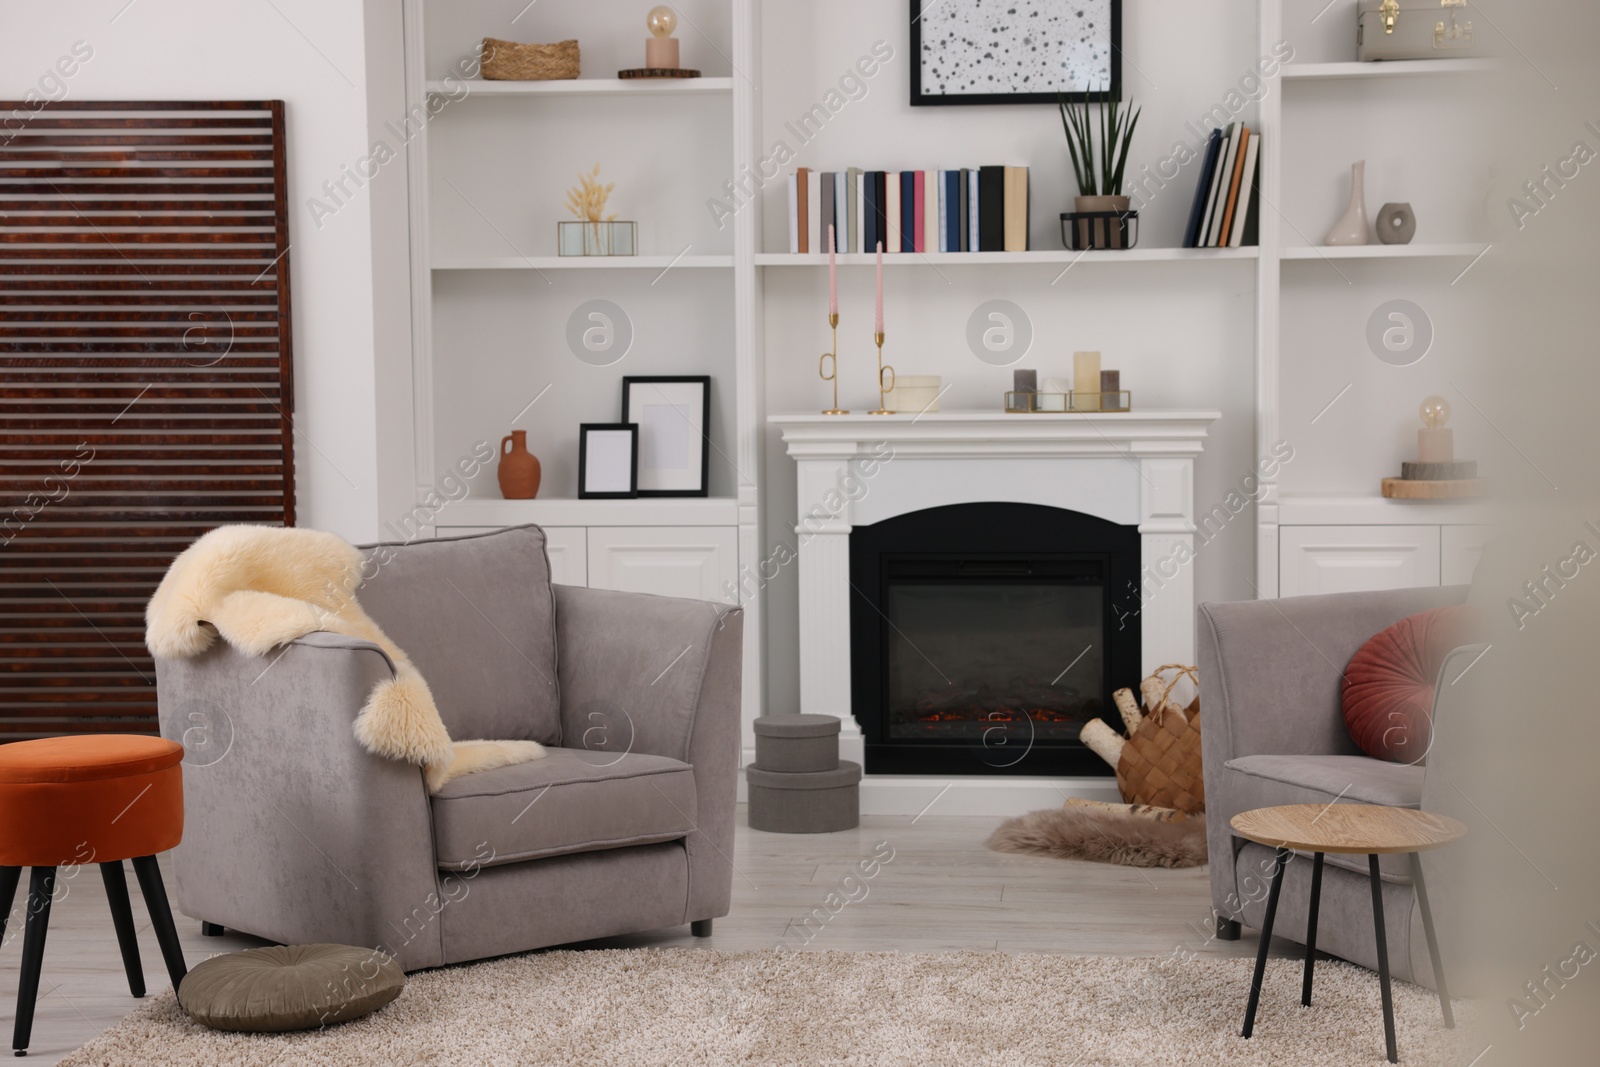 Photo of Comfortable armchairs, fireplace and shelves in living room. Interior design